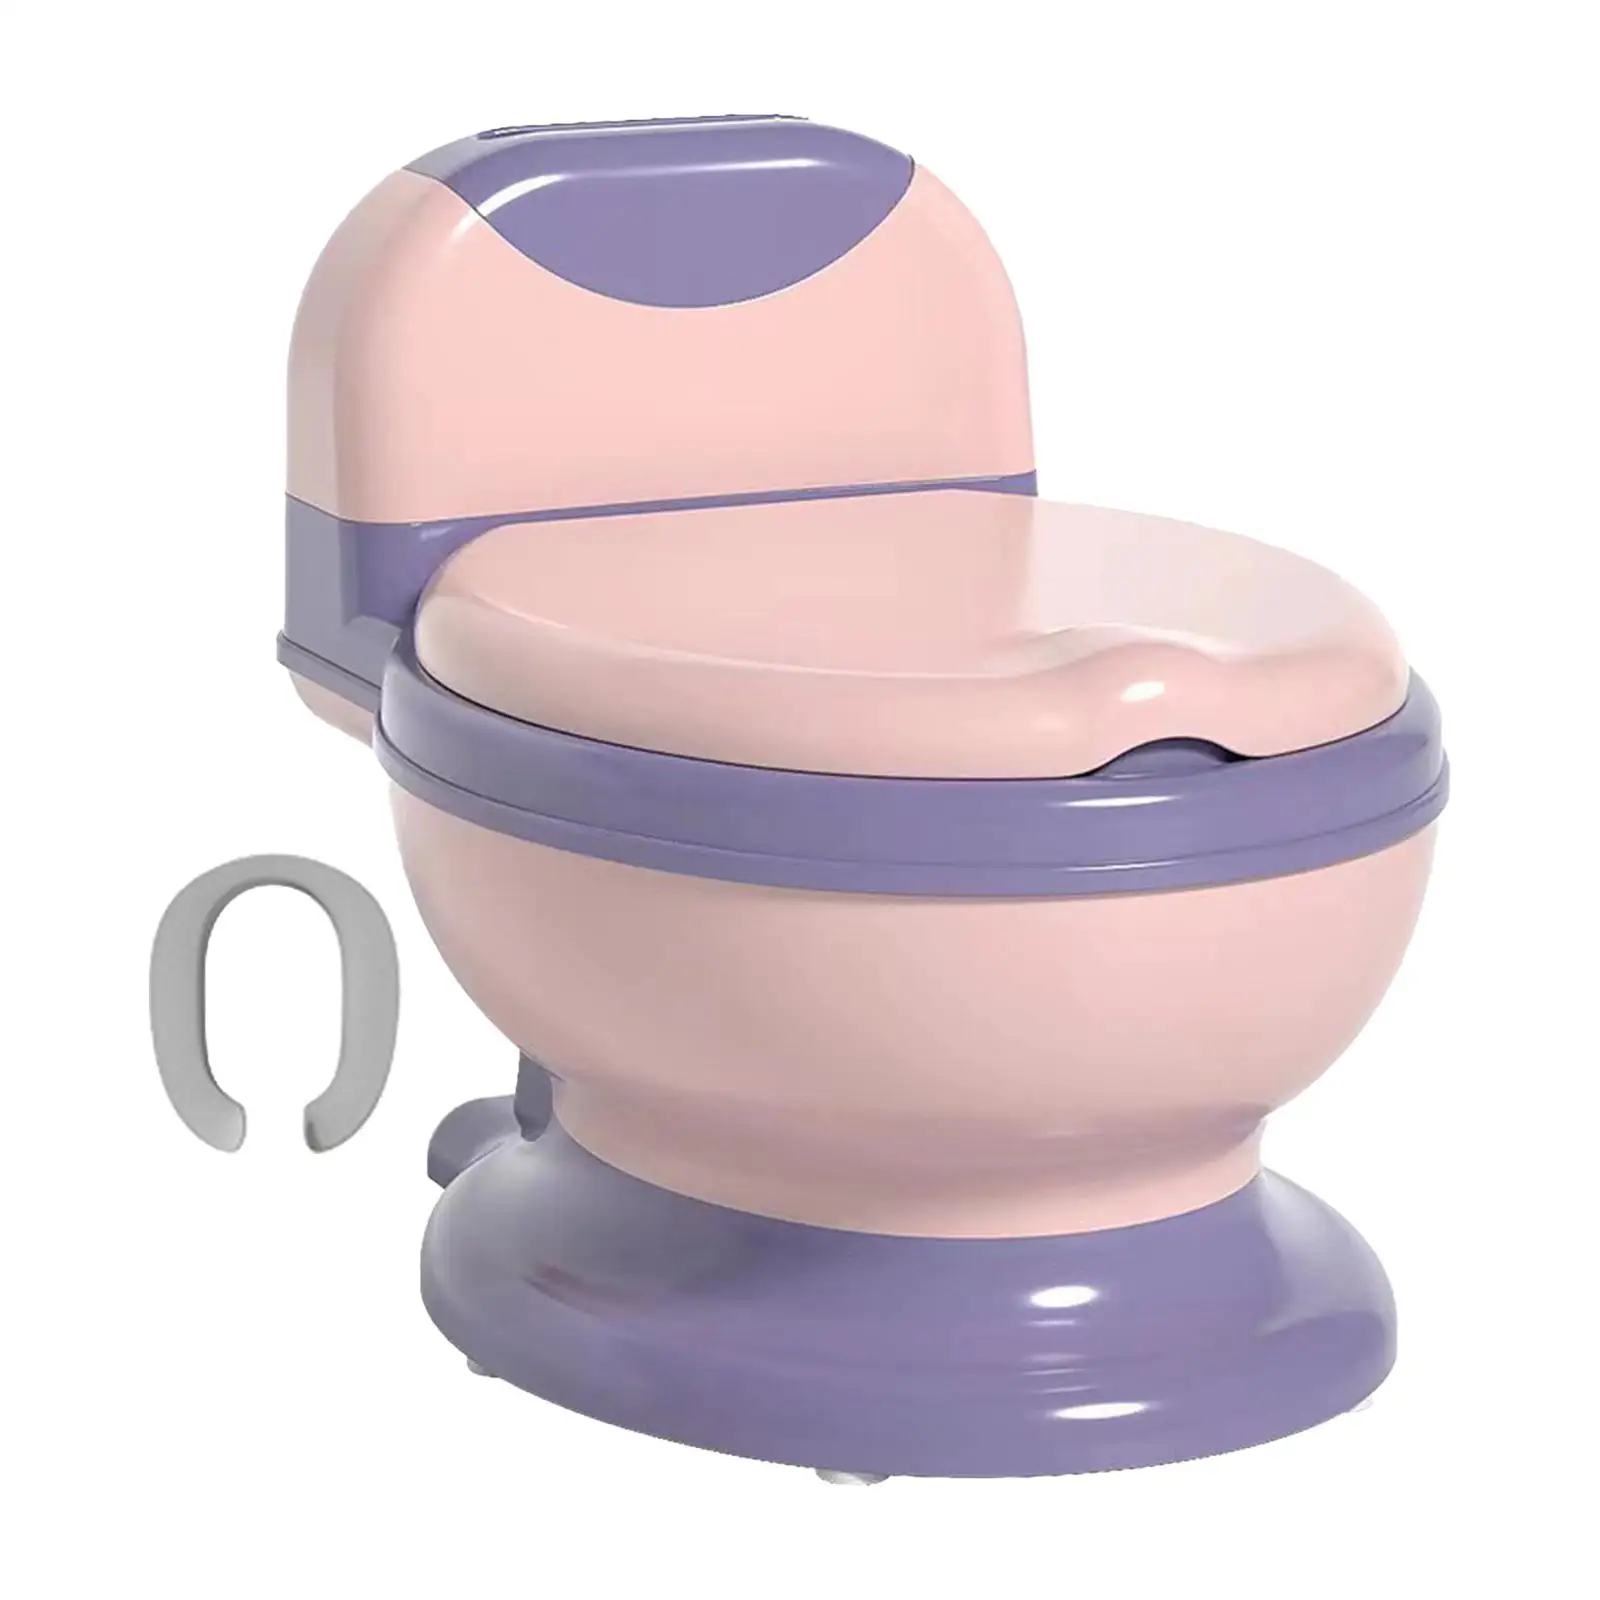 Potty Train Toilet Toilet Training Seat Potty Seat Portable Detachable Toddlers Potty Chair for Baby Kids Boys Girls Toddlers